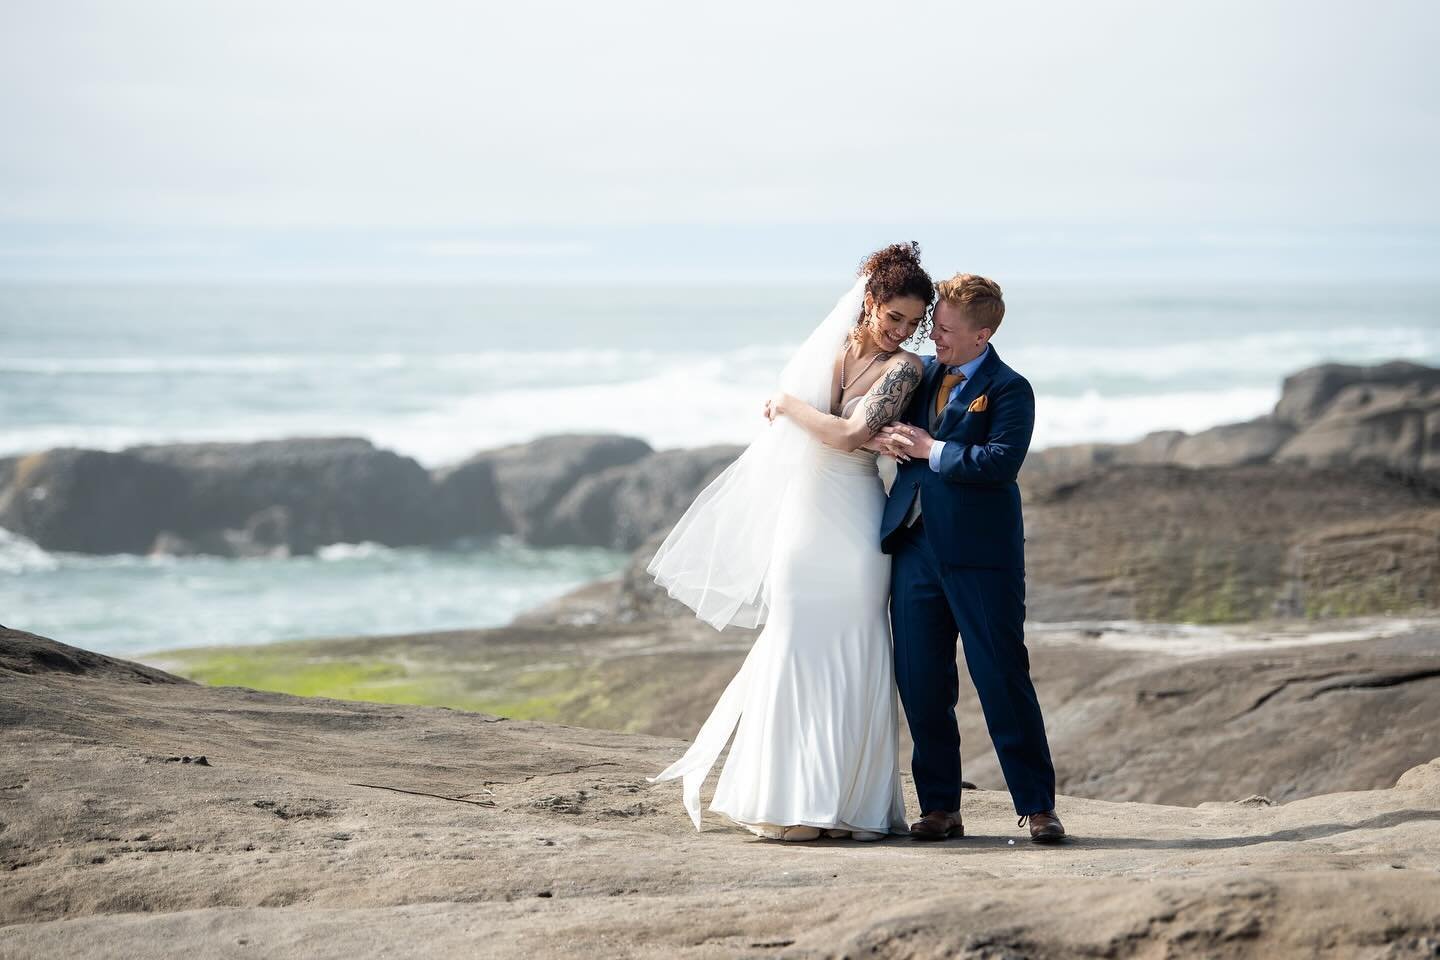 What a gorgeous elopement today with Blake and Kaiden overlooking the ocean! I can&rsquo;t wait to share more from this day with this amazing couple.